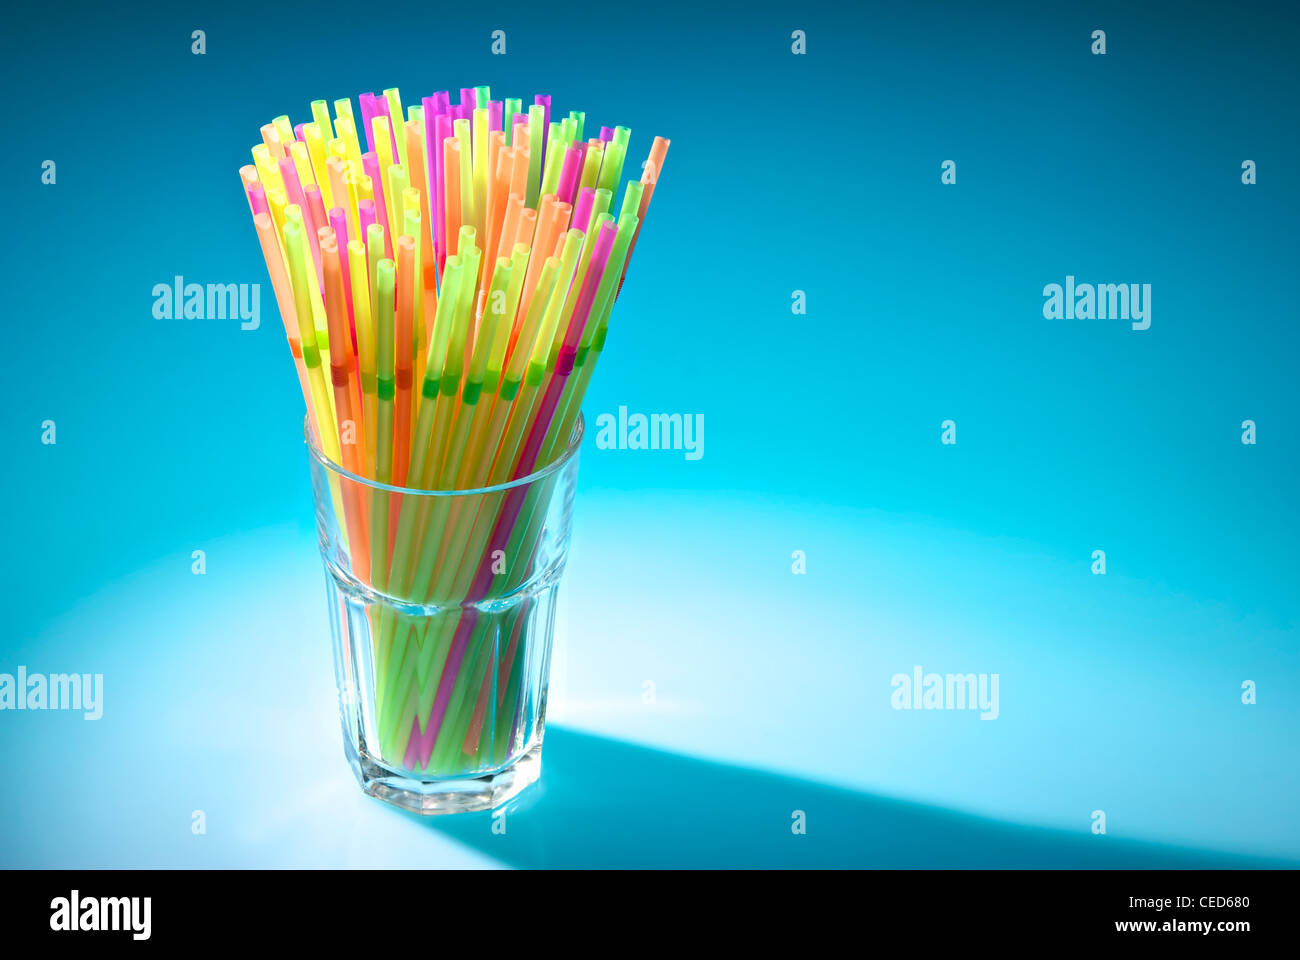 Multicolor flexible straws in the glass in spot of light isolated on blue background Stock Photo